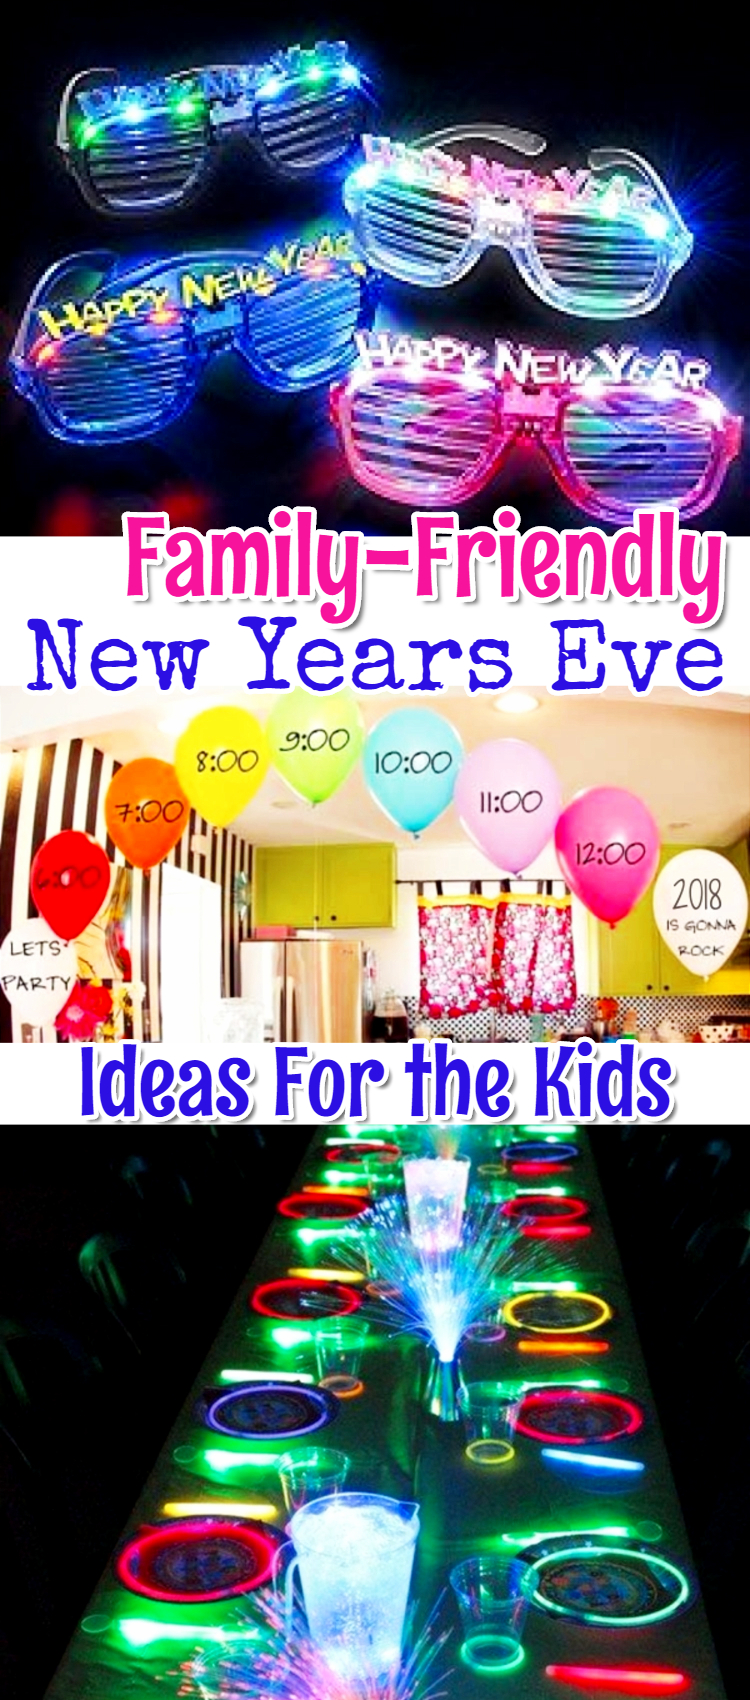 Ideas for Kids on New Years Eve